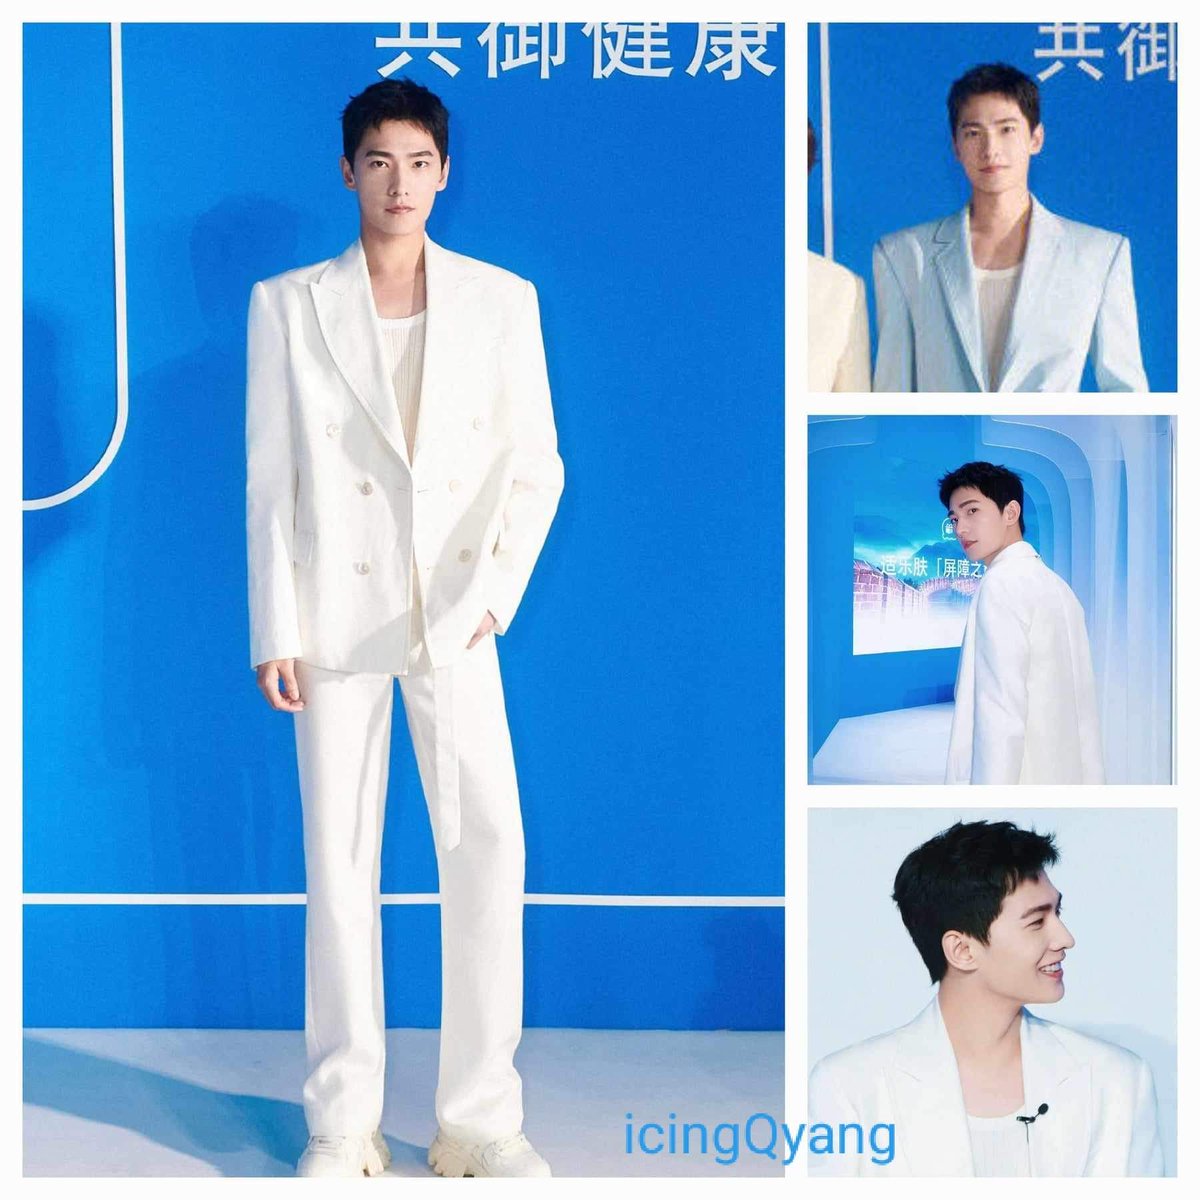 #YangYang杨洋  #maninwhite lol at that slim tall physique, casual pose, #eyecatching . #classicelegance  #throwbackpix